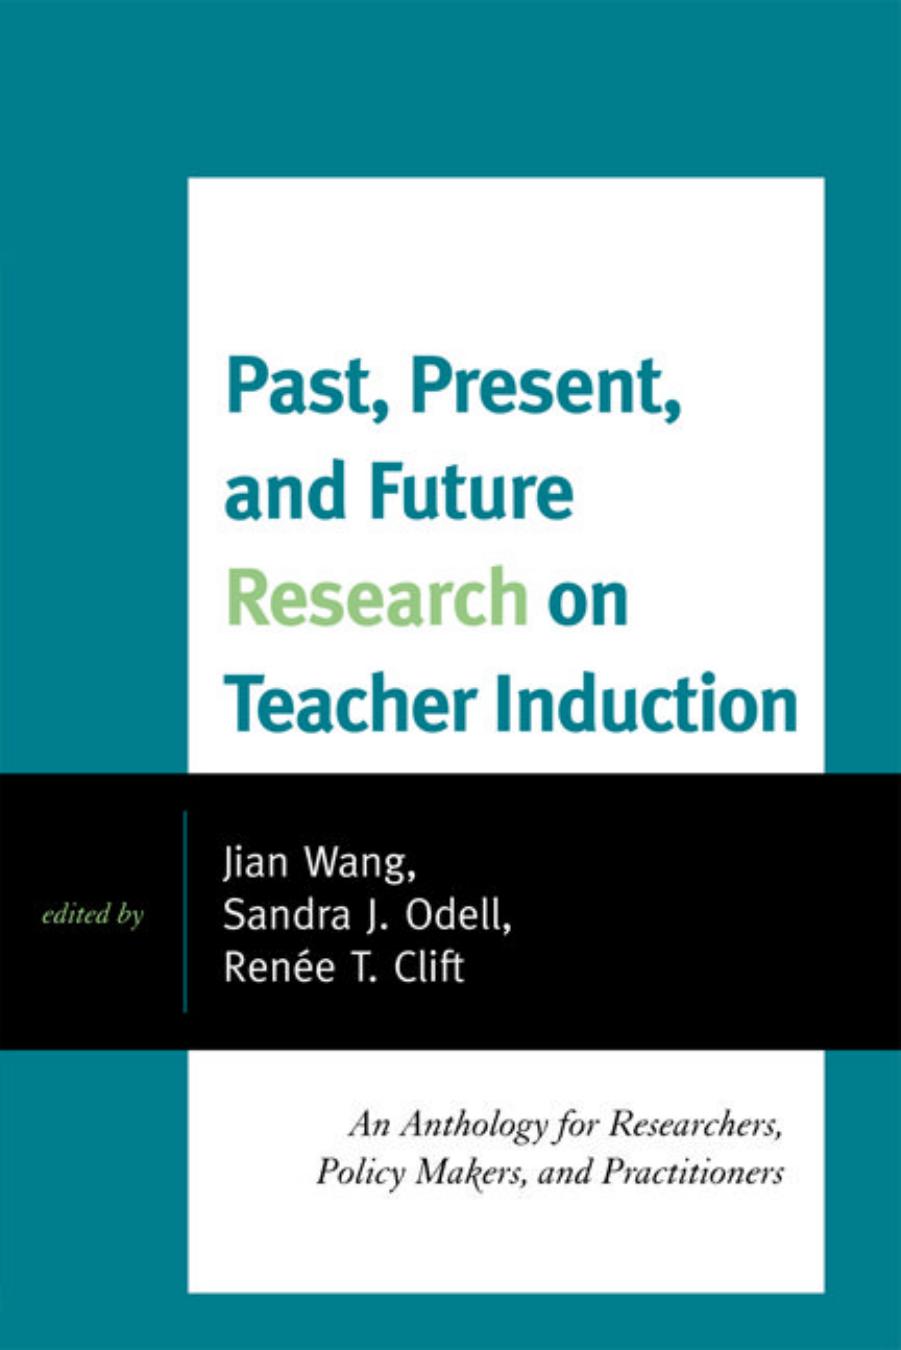 (eBook PDF)Past, Present, and Future Research on Teacher Induction by Jian Wang,Sandra J. Odell